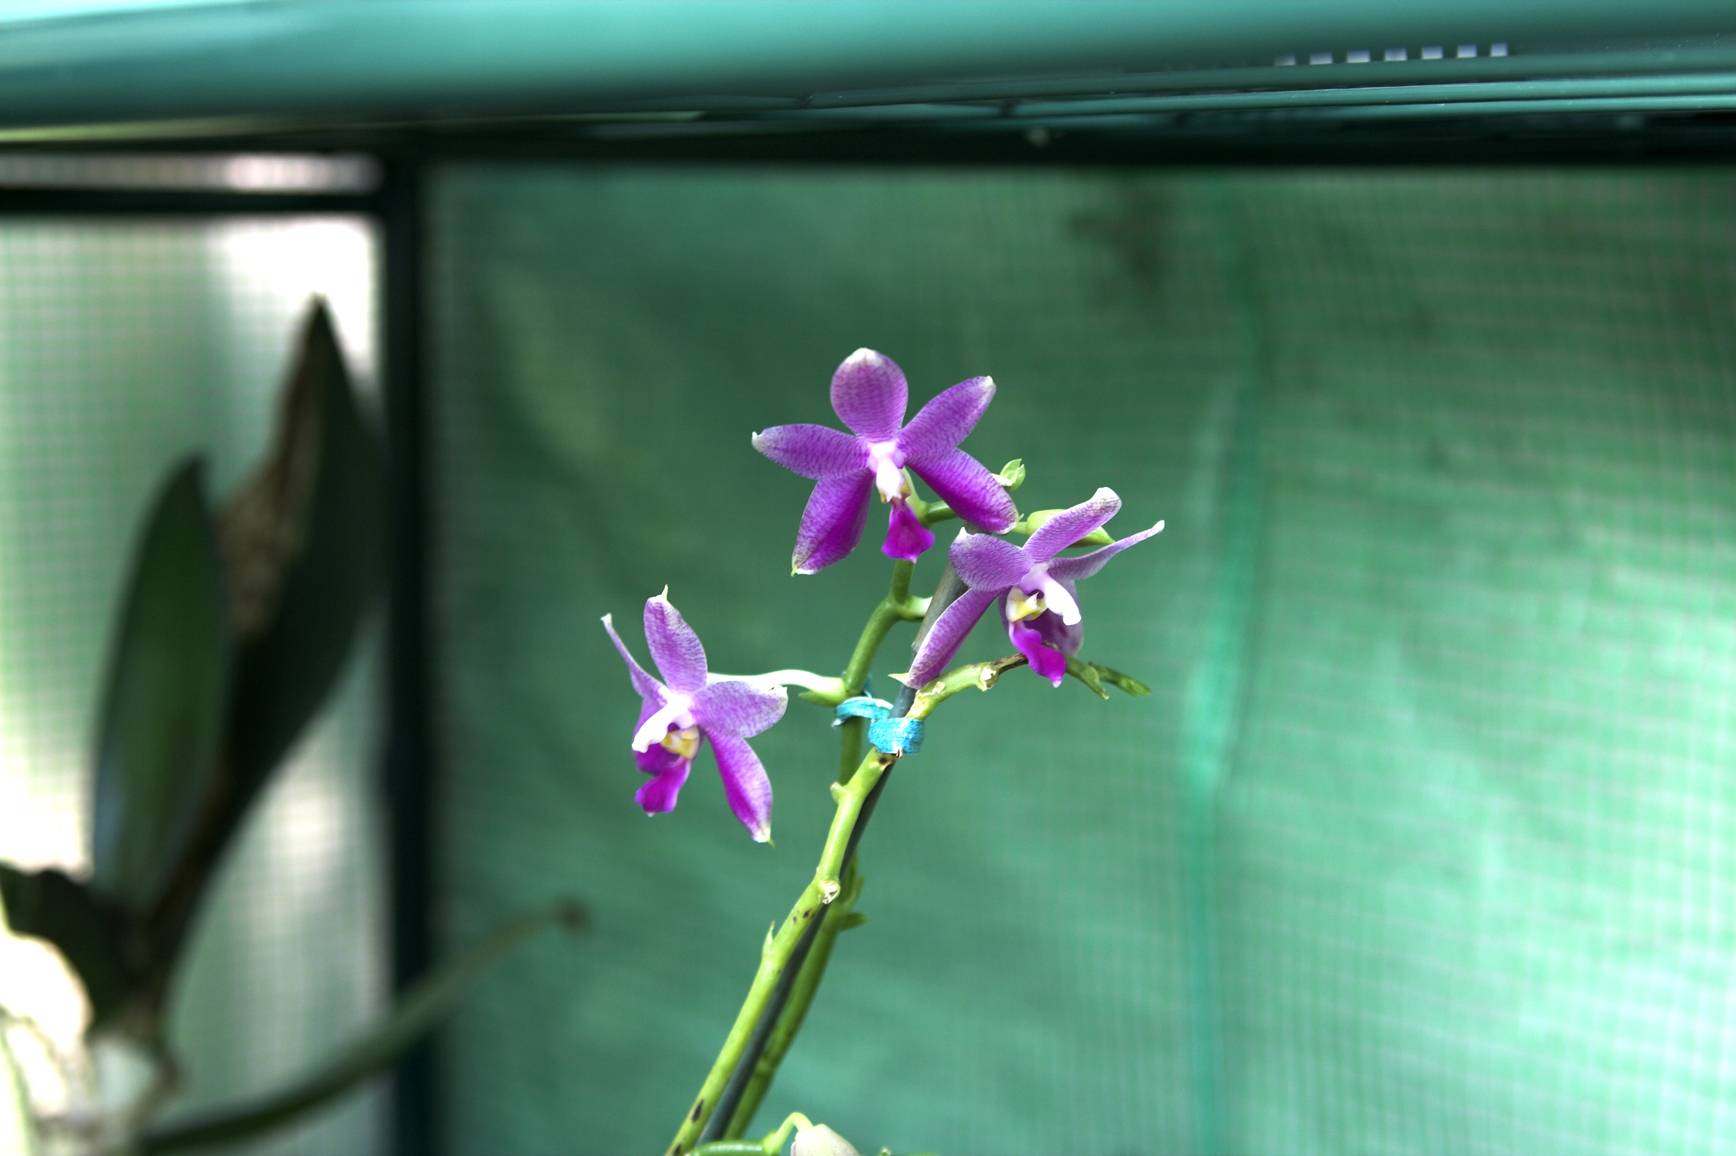 Some phal I got in Livermore